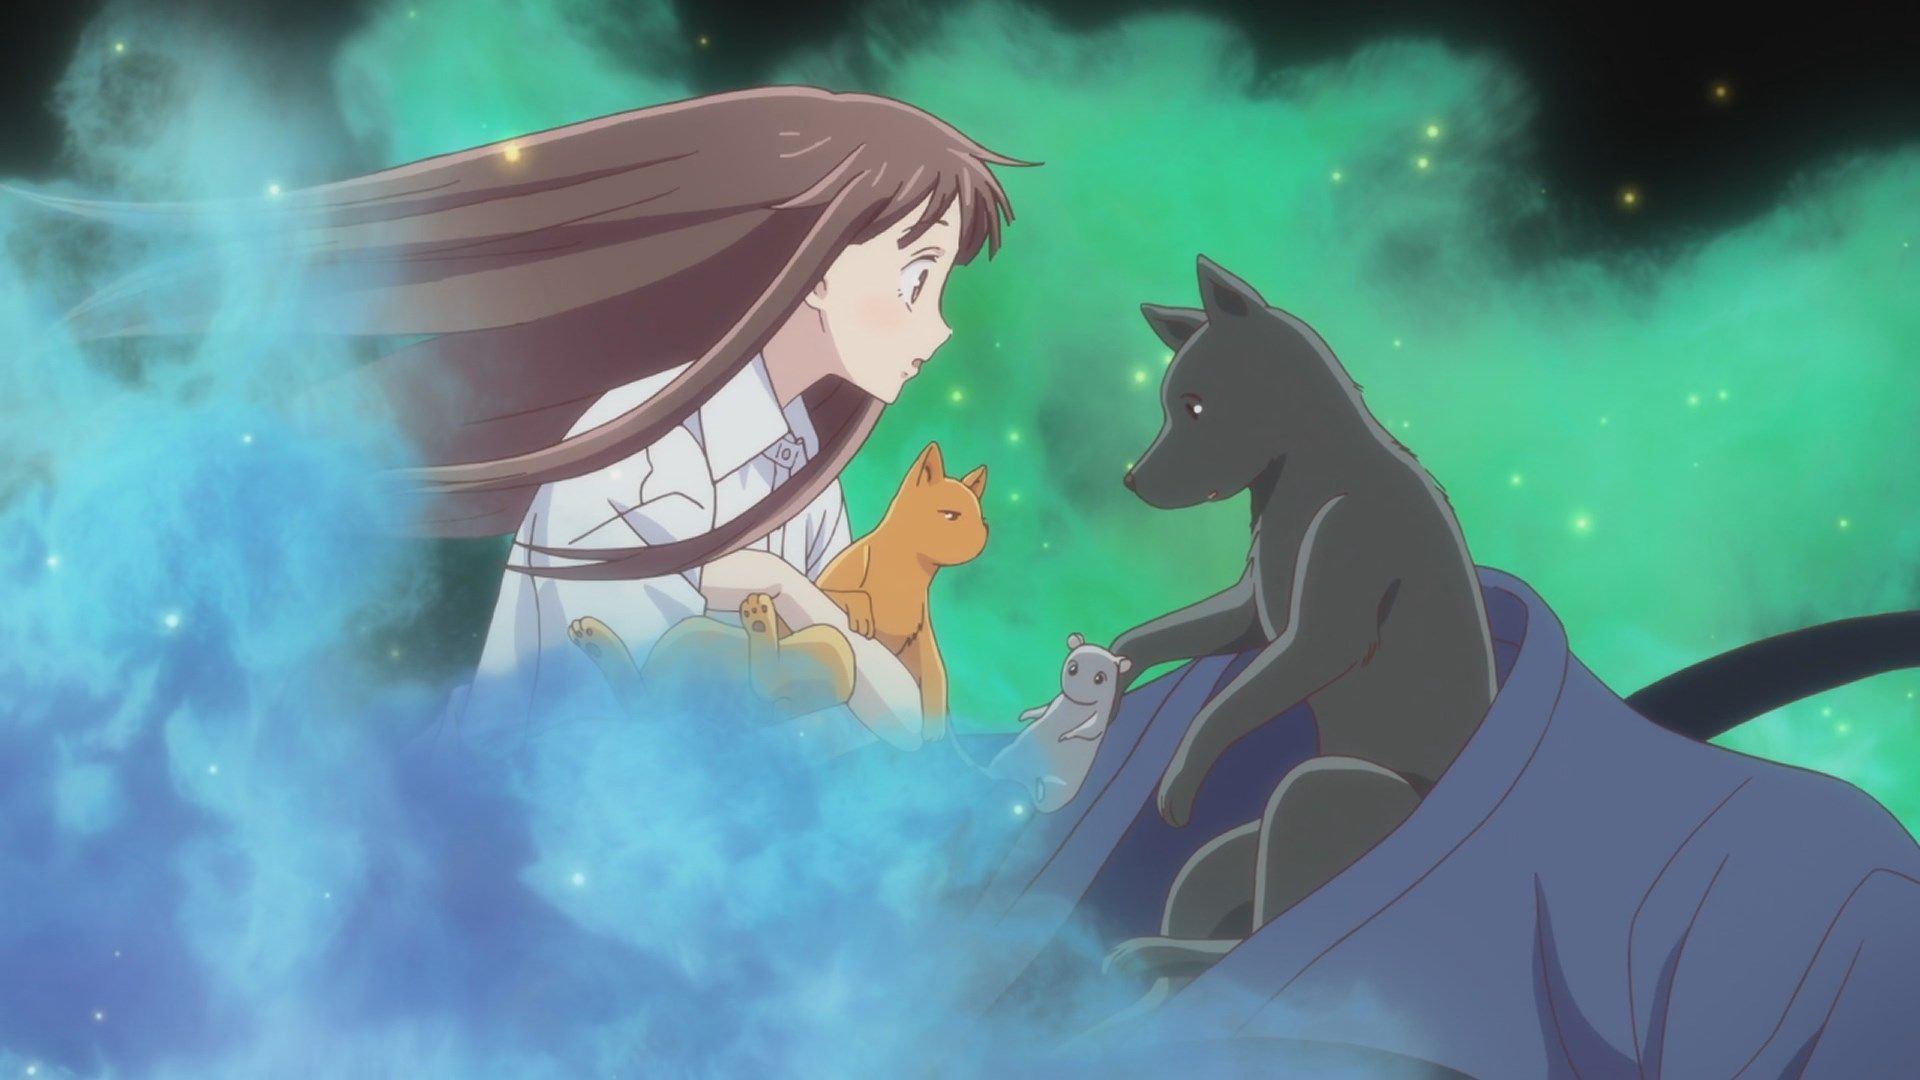 A still of a girl and a dog in Fruits Basket